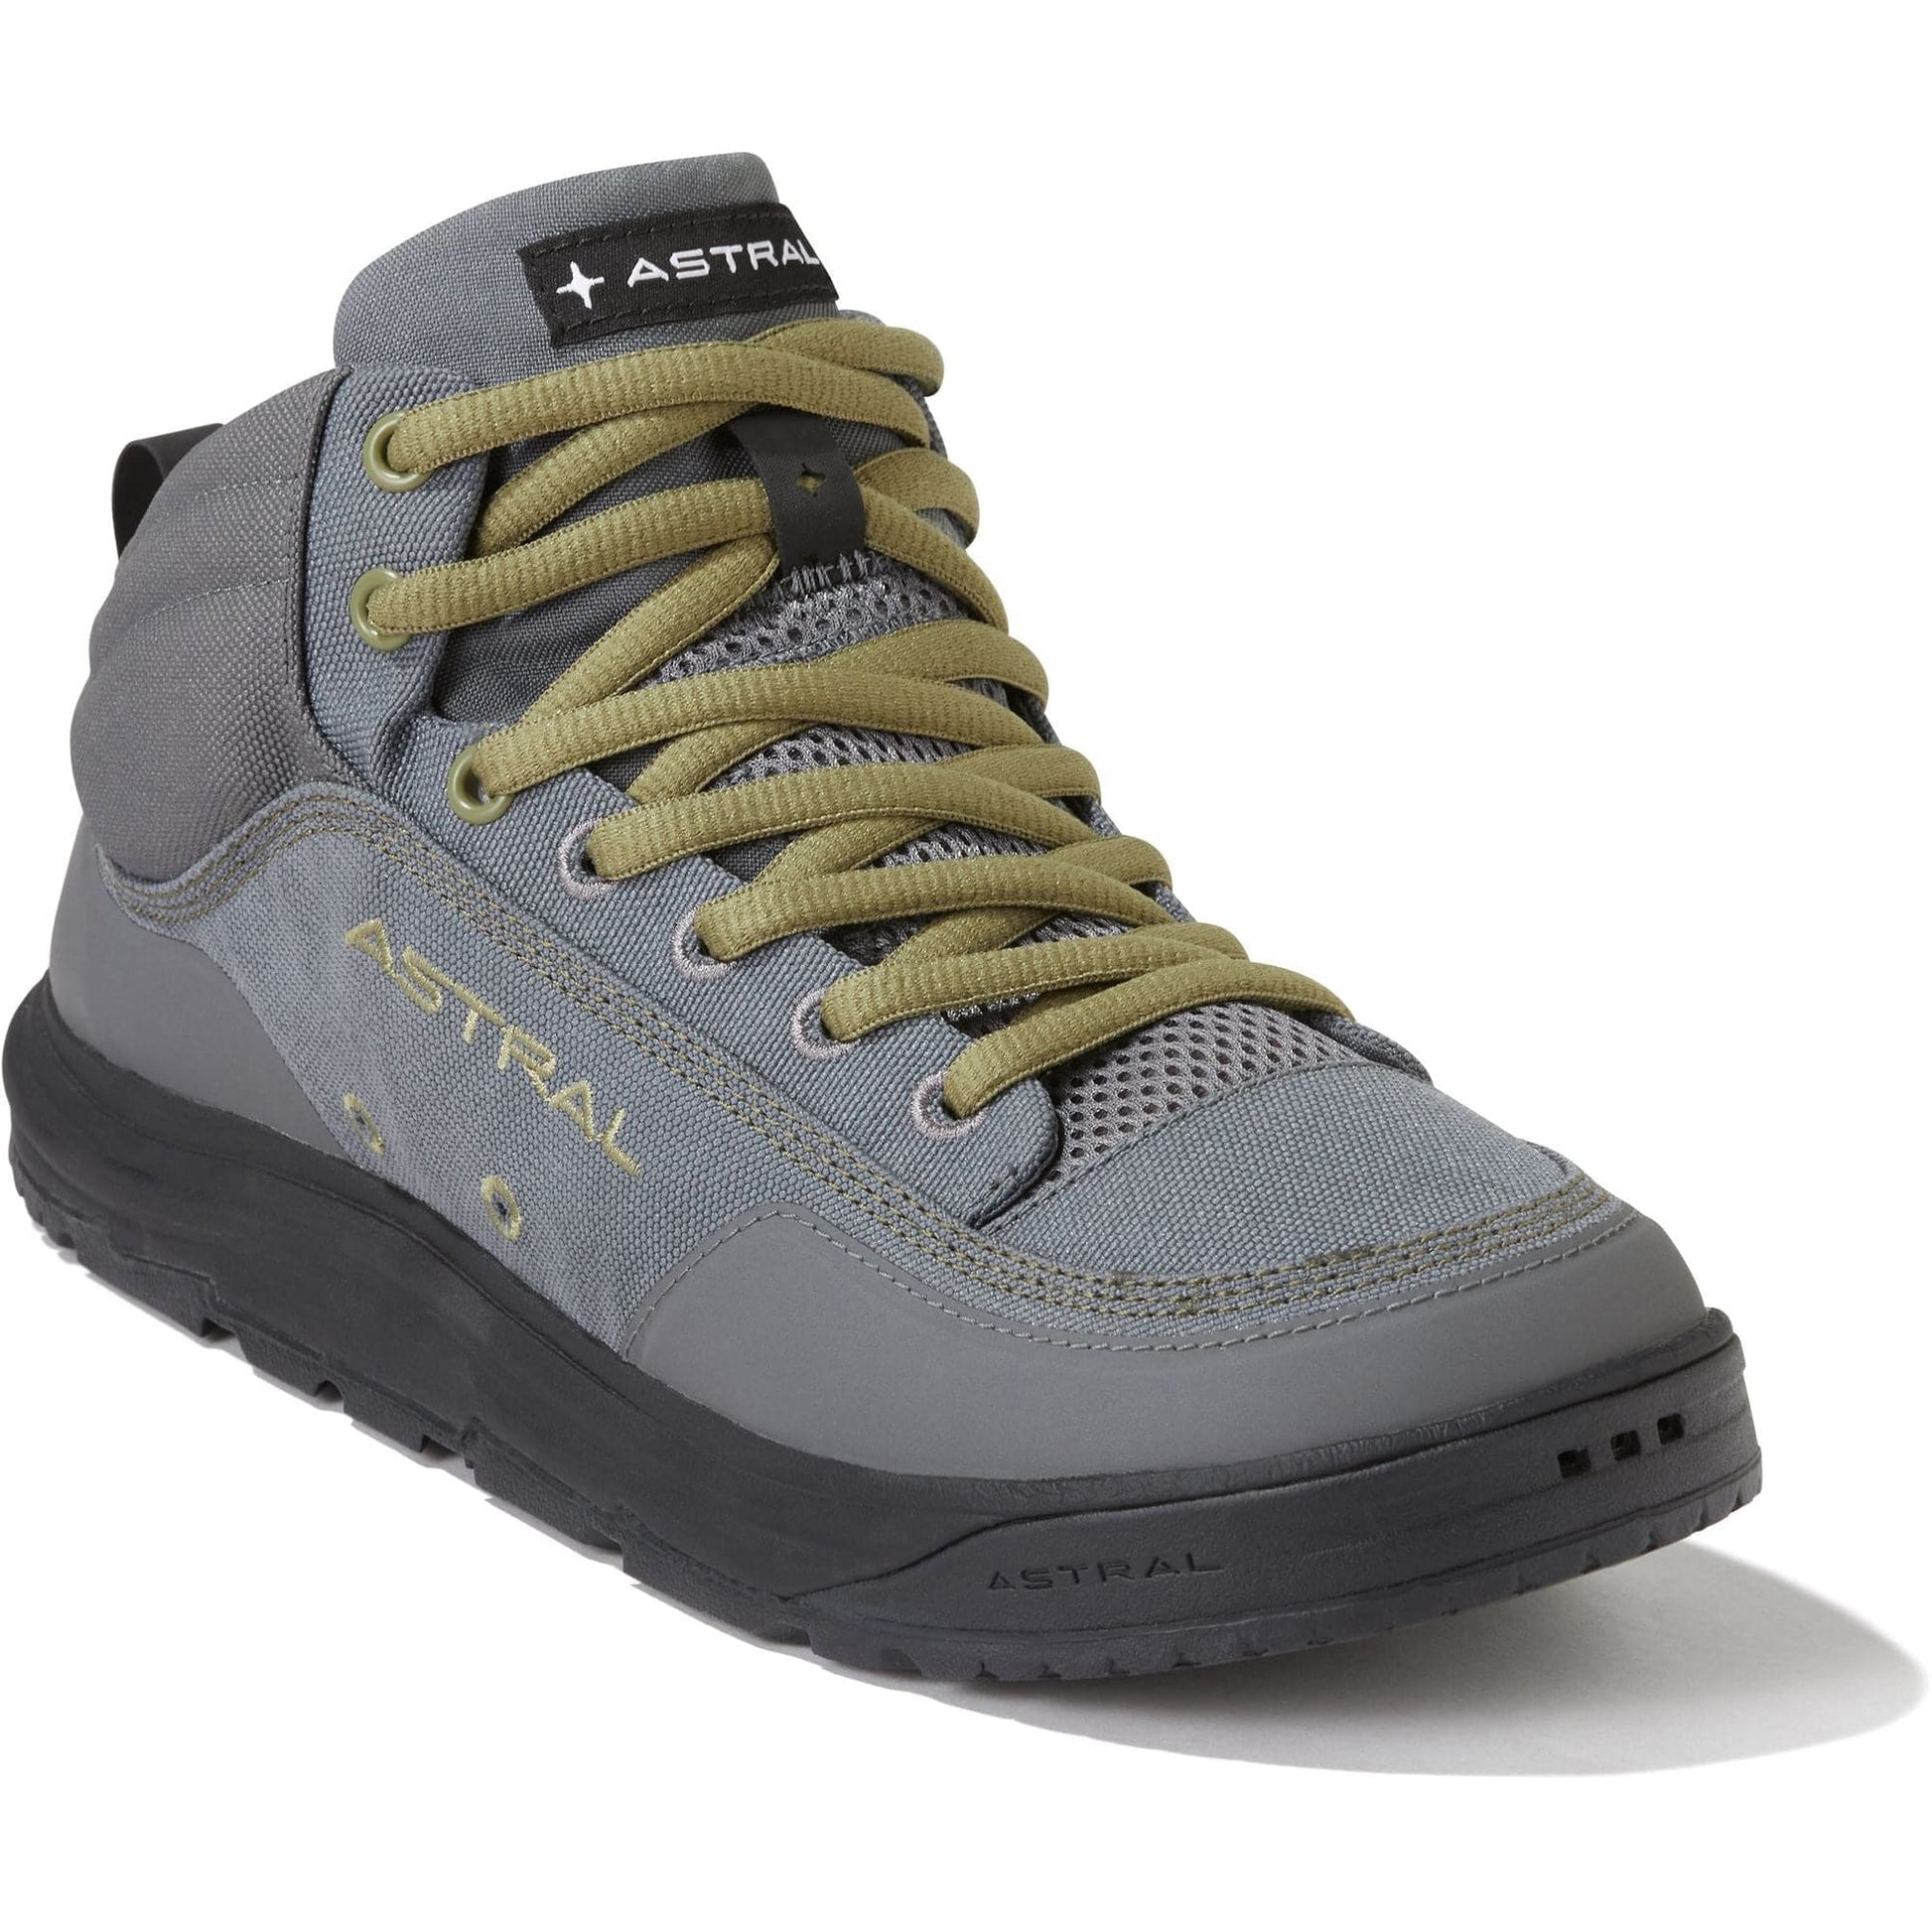 Featuring the Rassler 2.0 men's footwear, women's footwear manufactured by Astral shown here from a fifth angle.